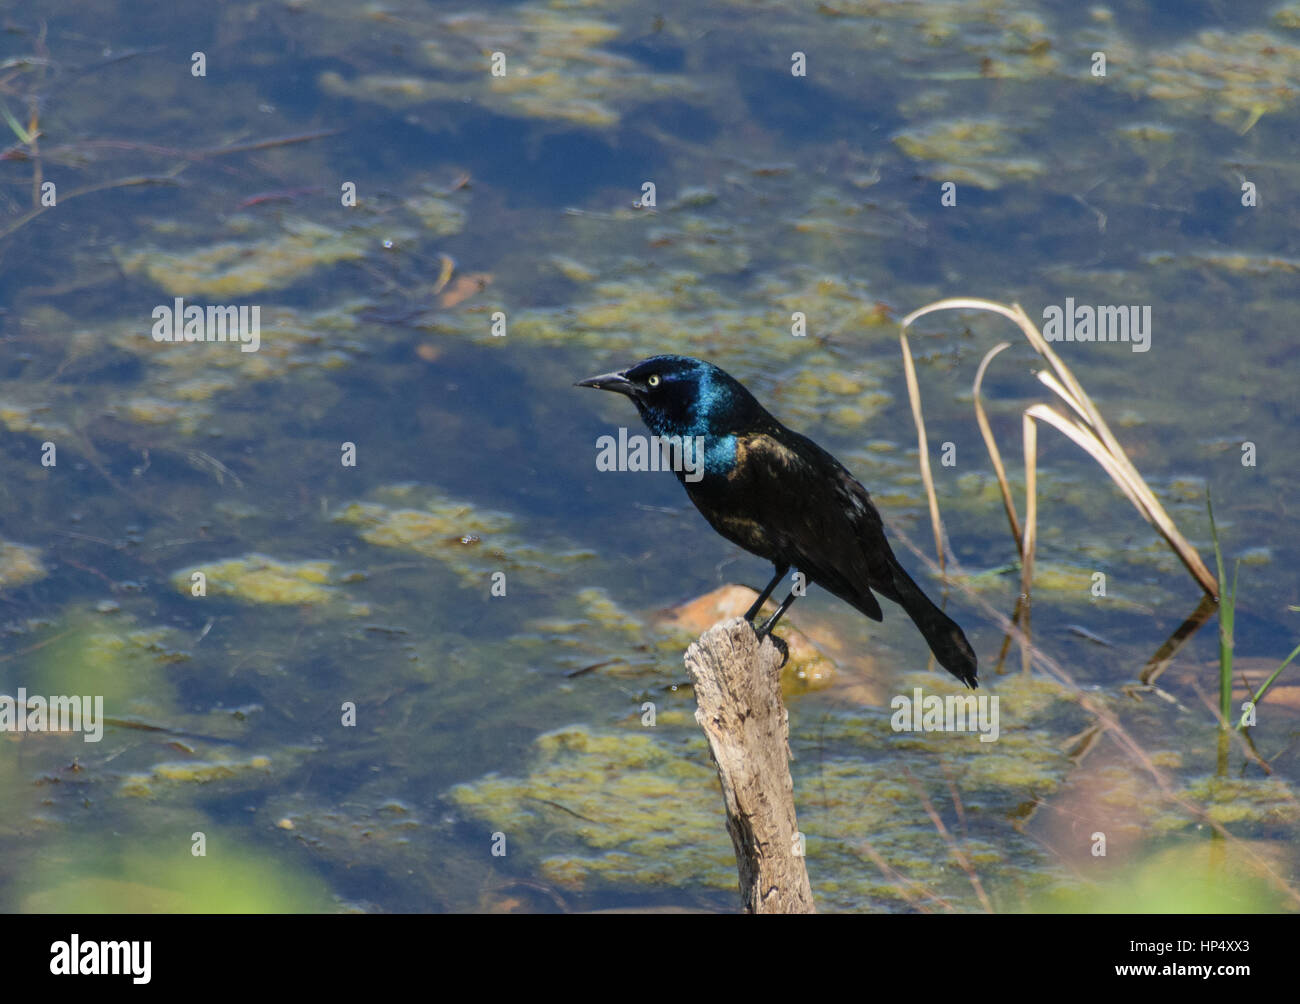 A Pretty Common Grackle and Its Iridescent Plumage Stock Photo